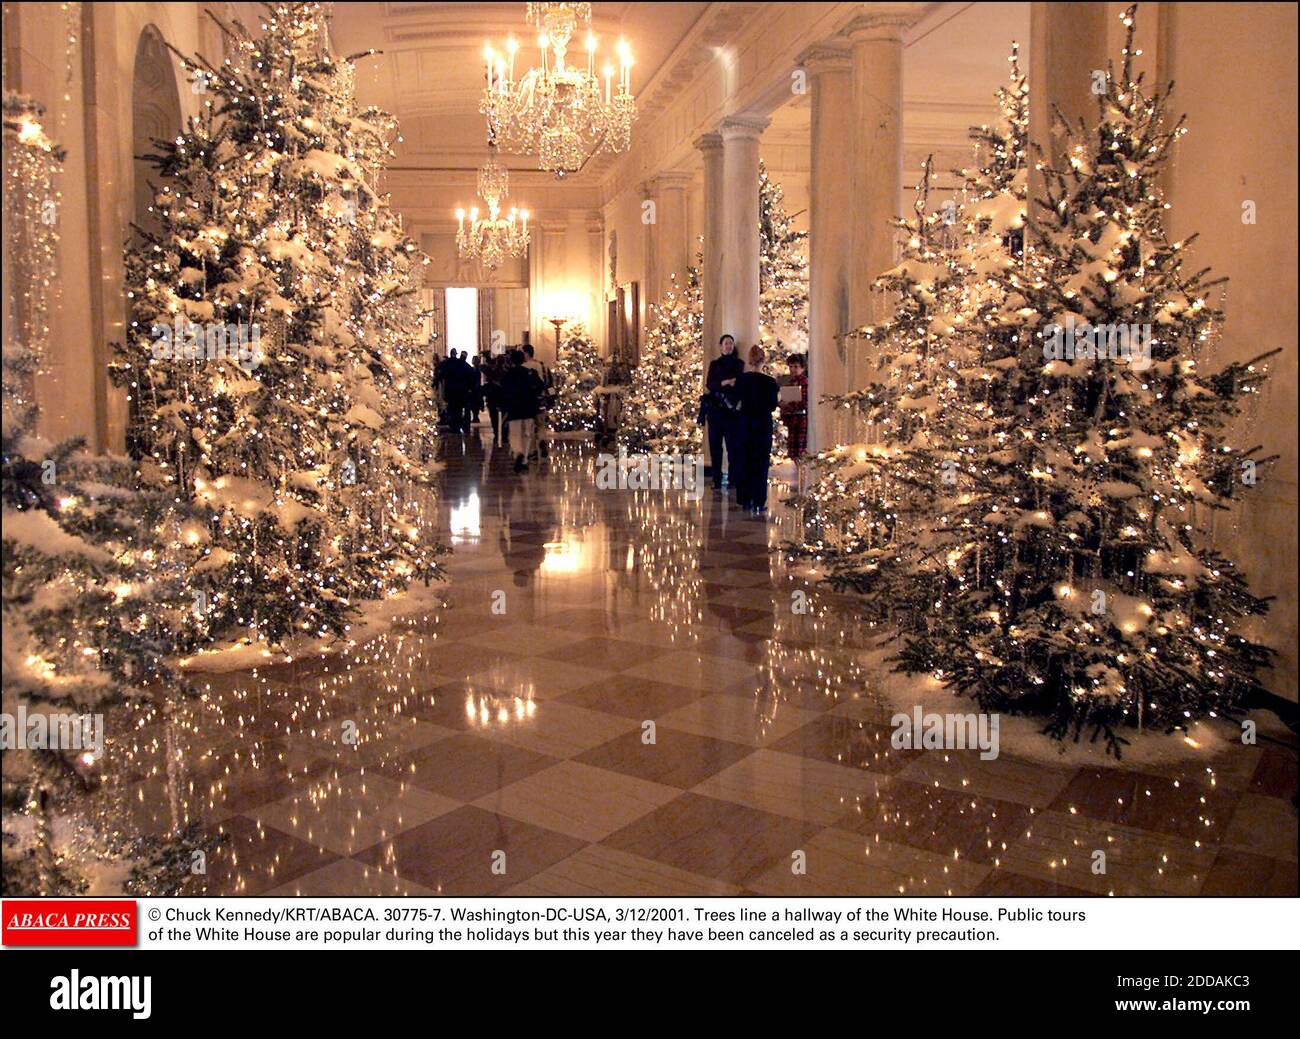 NO FILM, NO VIDEO, NO TV, NO DOCUMENTARY - © Chuck Kennedy/KRT/ABACA. 30775-7. Washington-DC-USA, 3/12/2001. Trees line a hallway of the White House. Public tours of the White House are popular during the holidays but this year they have been canceled as a security precaution. Stock Photo